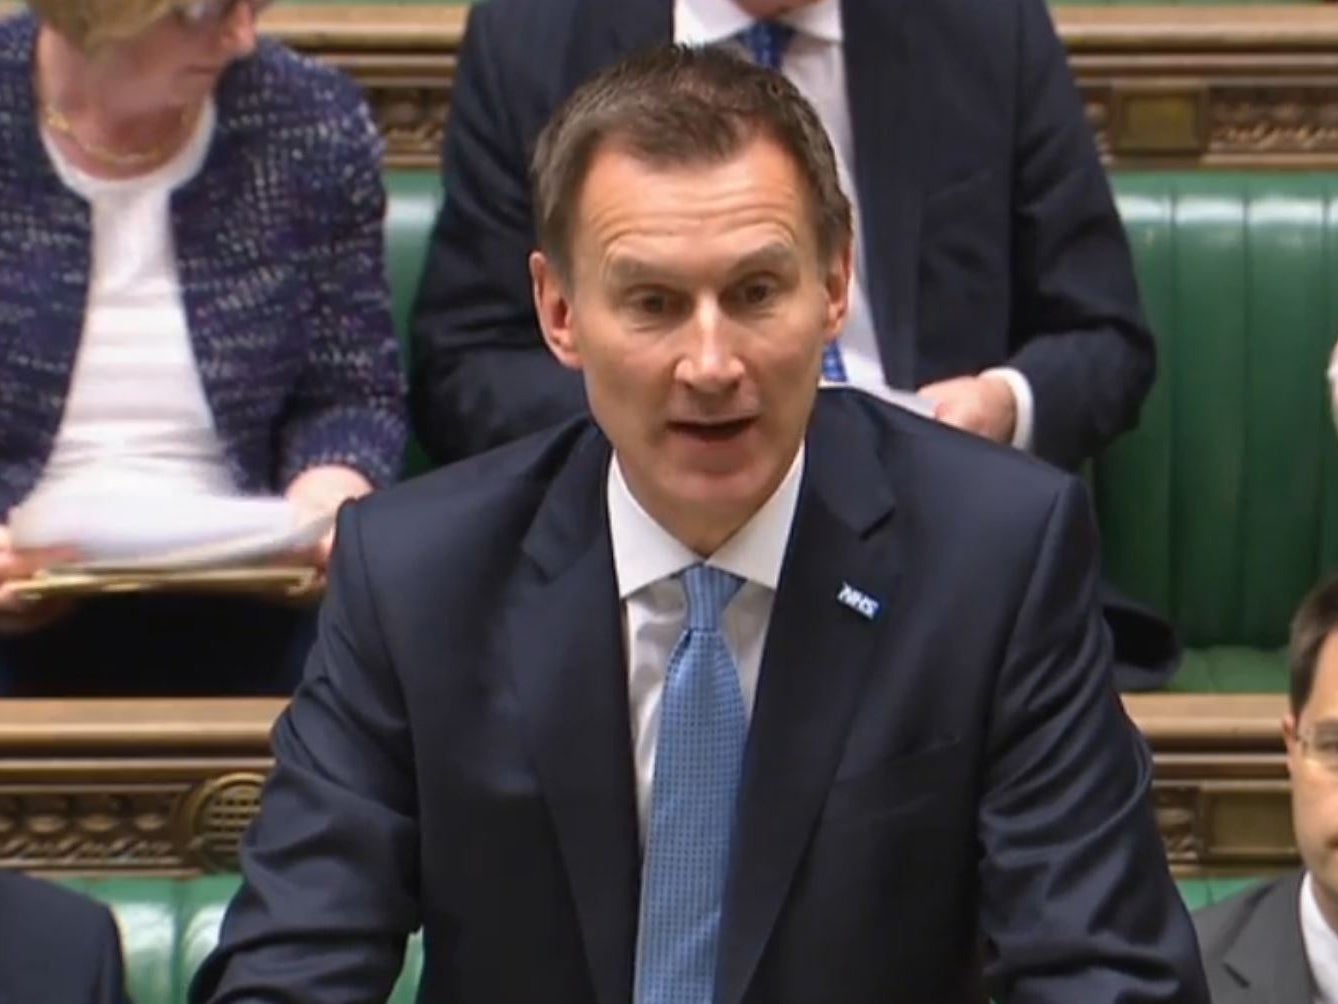 Jeremy Hunt, the health and social care secretary, wants more money and Philip Hammond, the chancellor, having been told by May to give it to him, is negotiating the terms and conditions